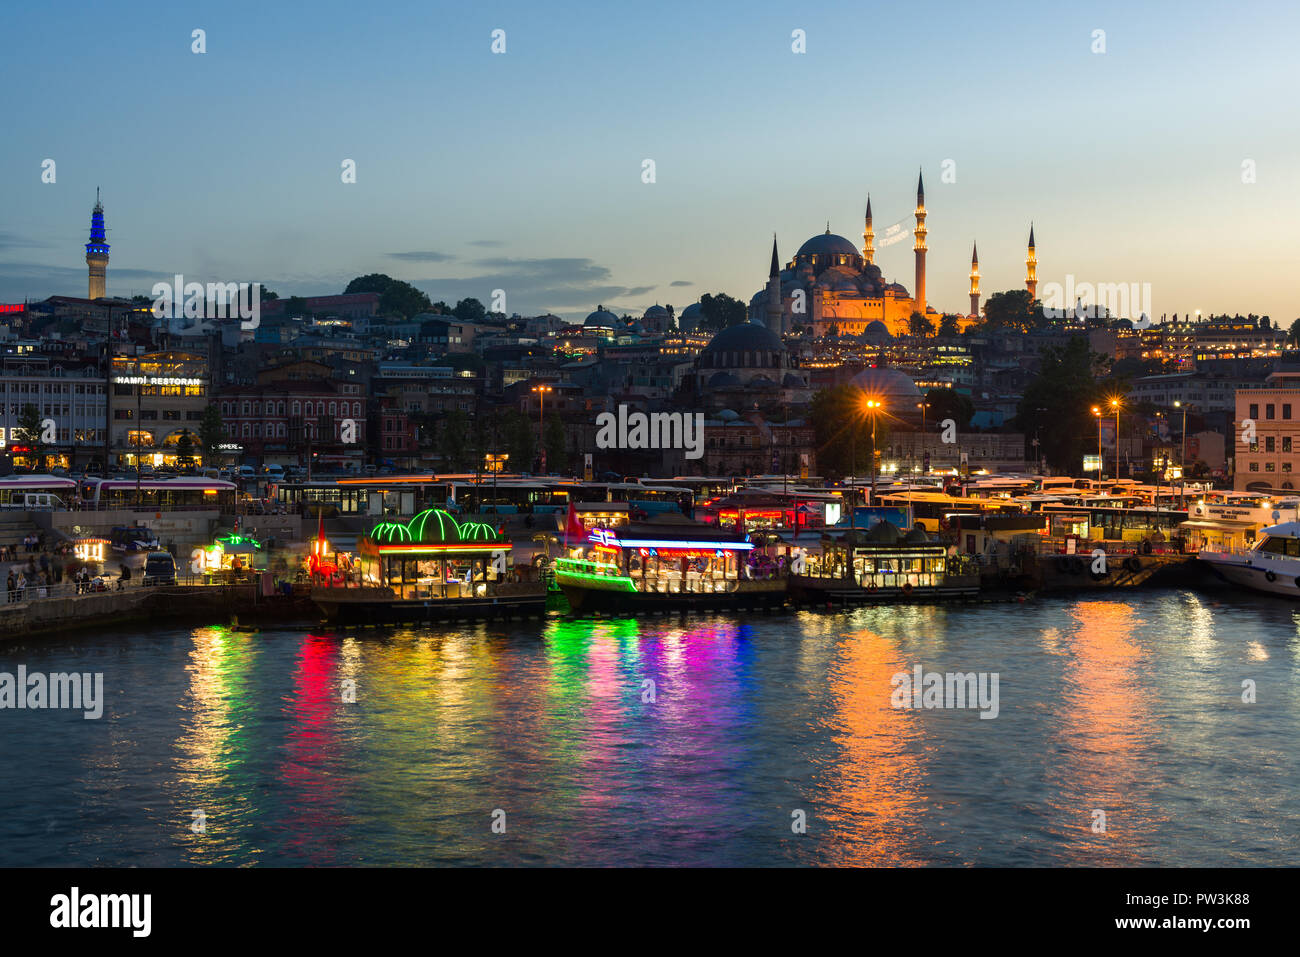 The brightly lit floating kitchen boats of Eminonu with Suleymaniye mosque and Golden Horn in background at dusk, Istanbul, Turkey Stock Photo